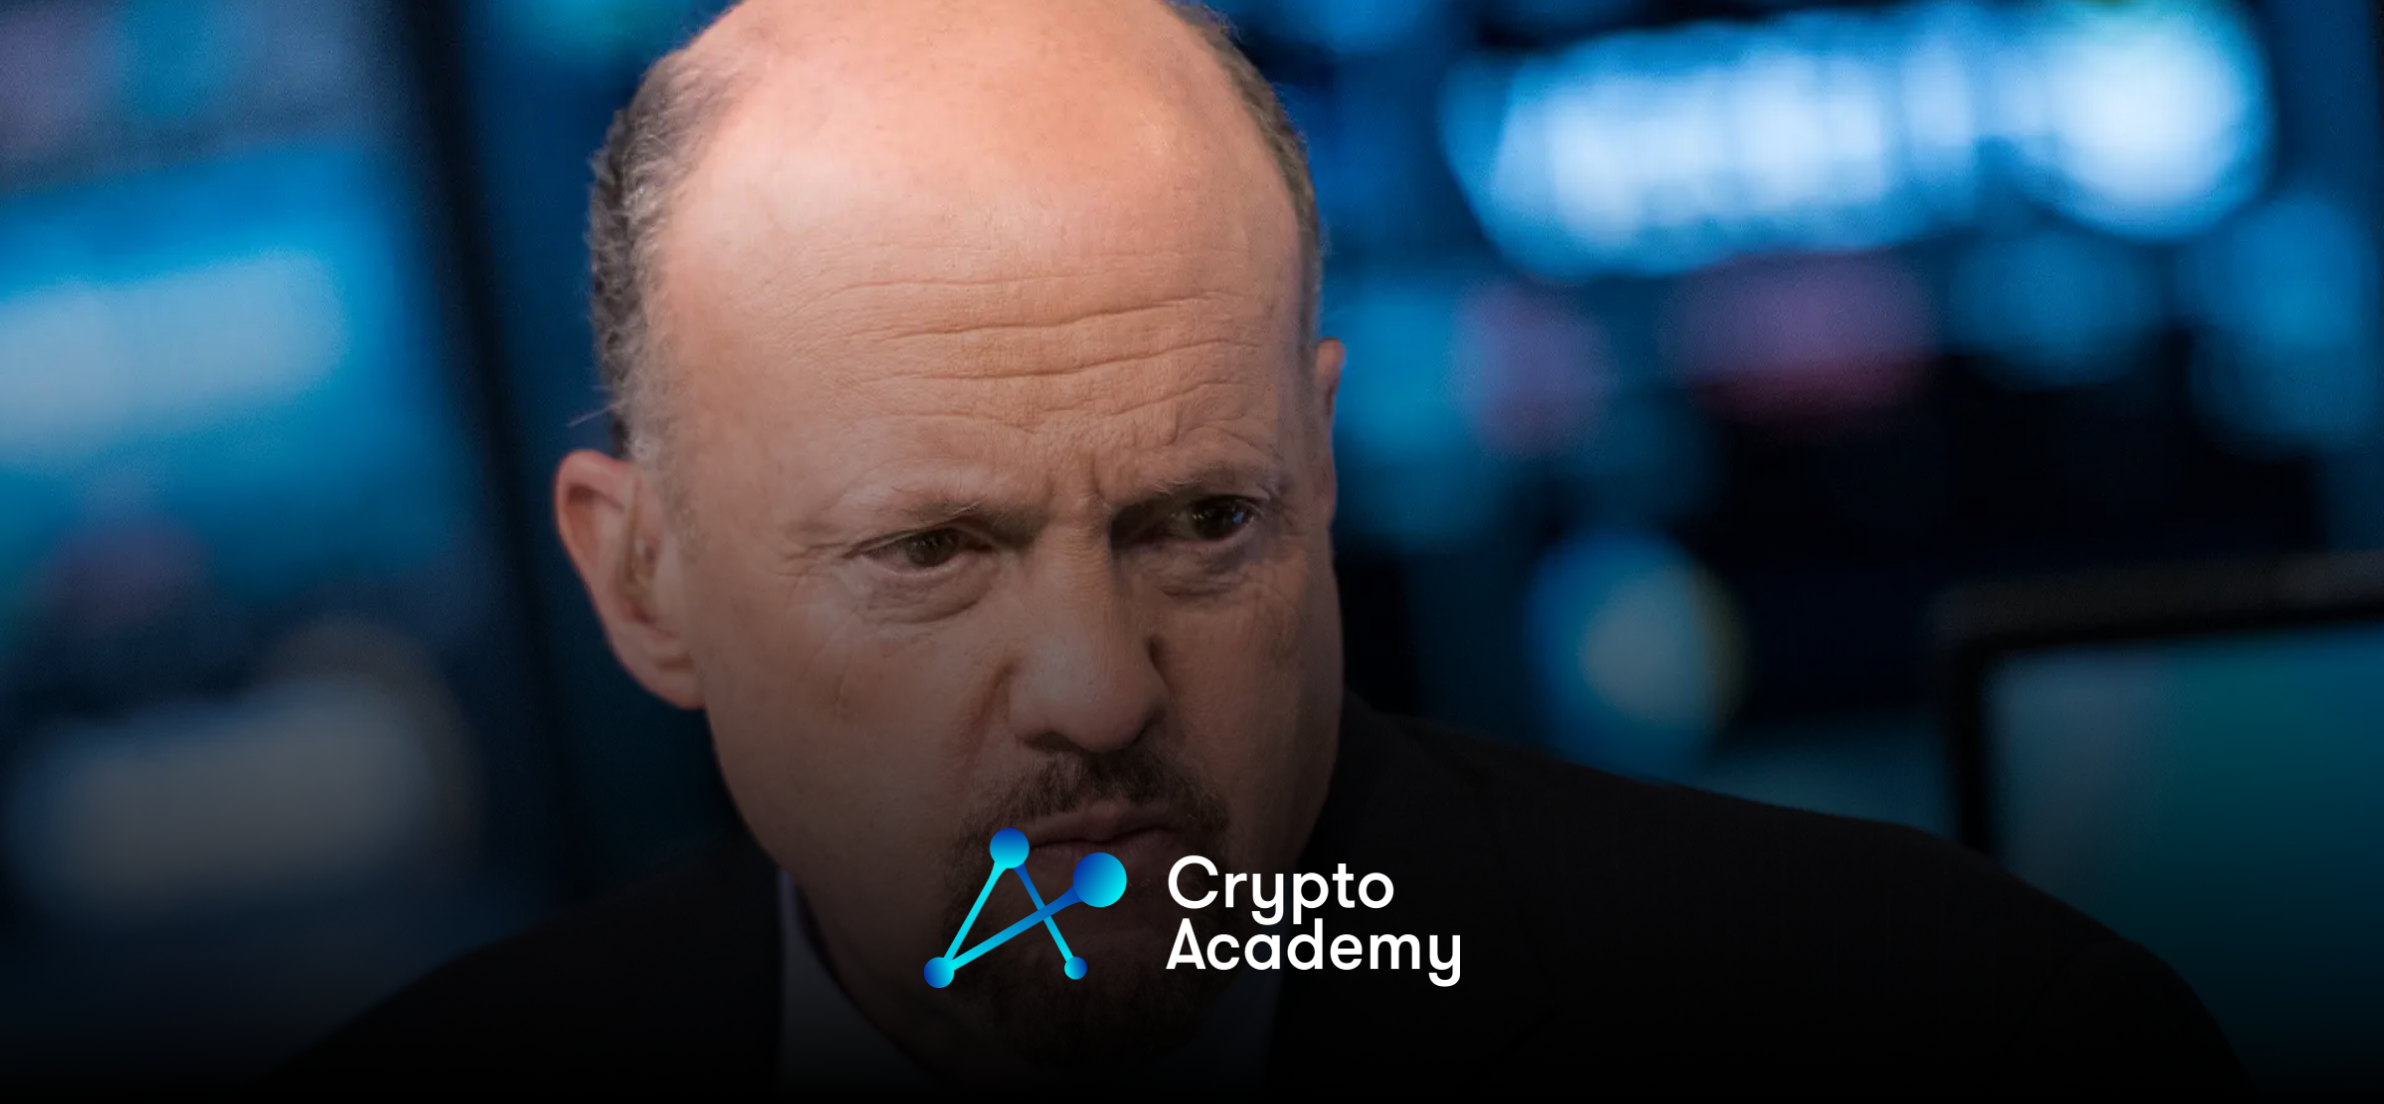 Jim Cramer Changes His Stance on Bitcoin